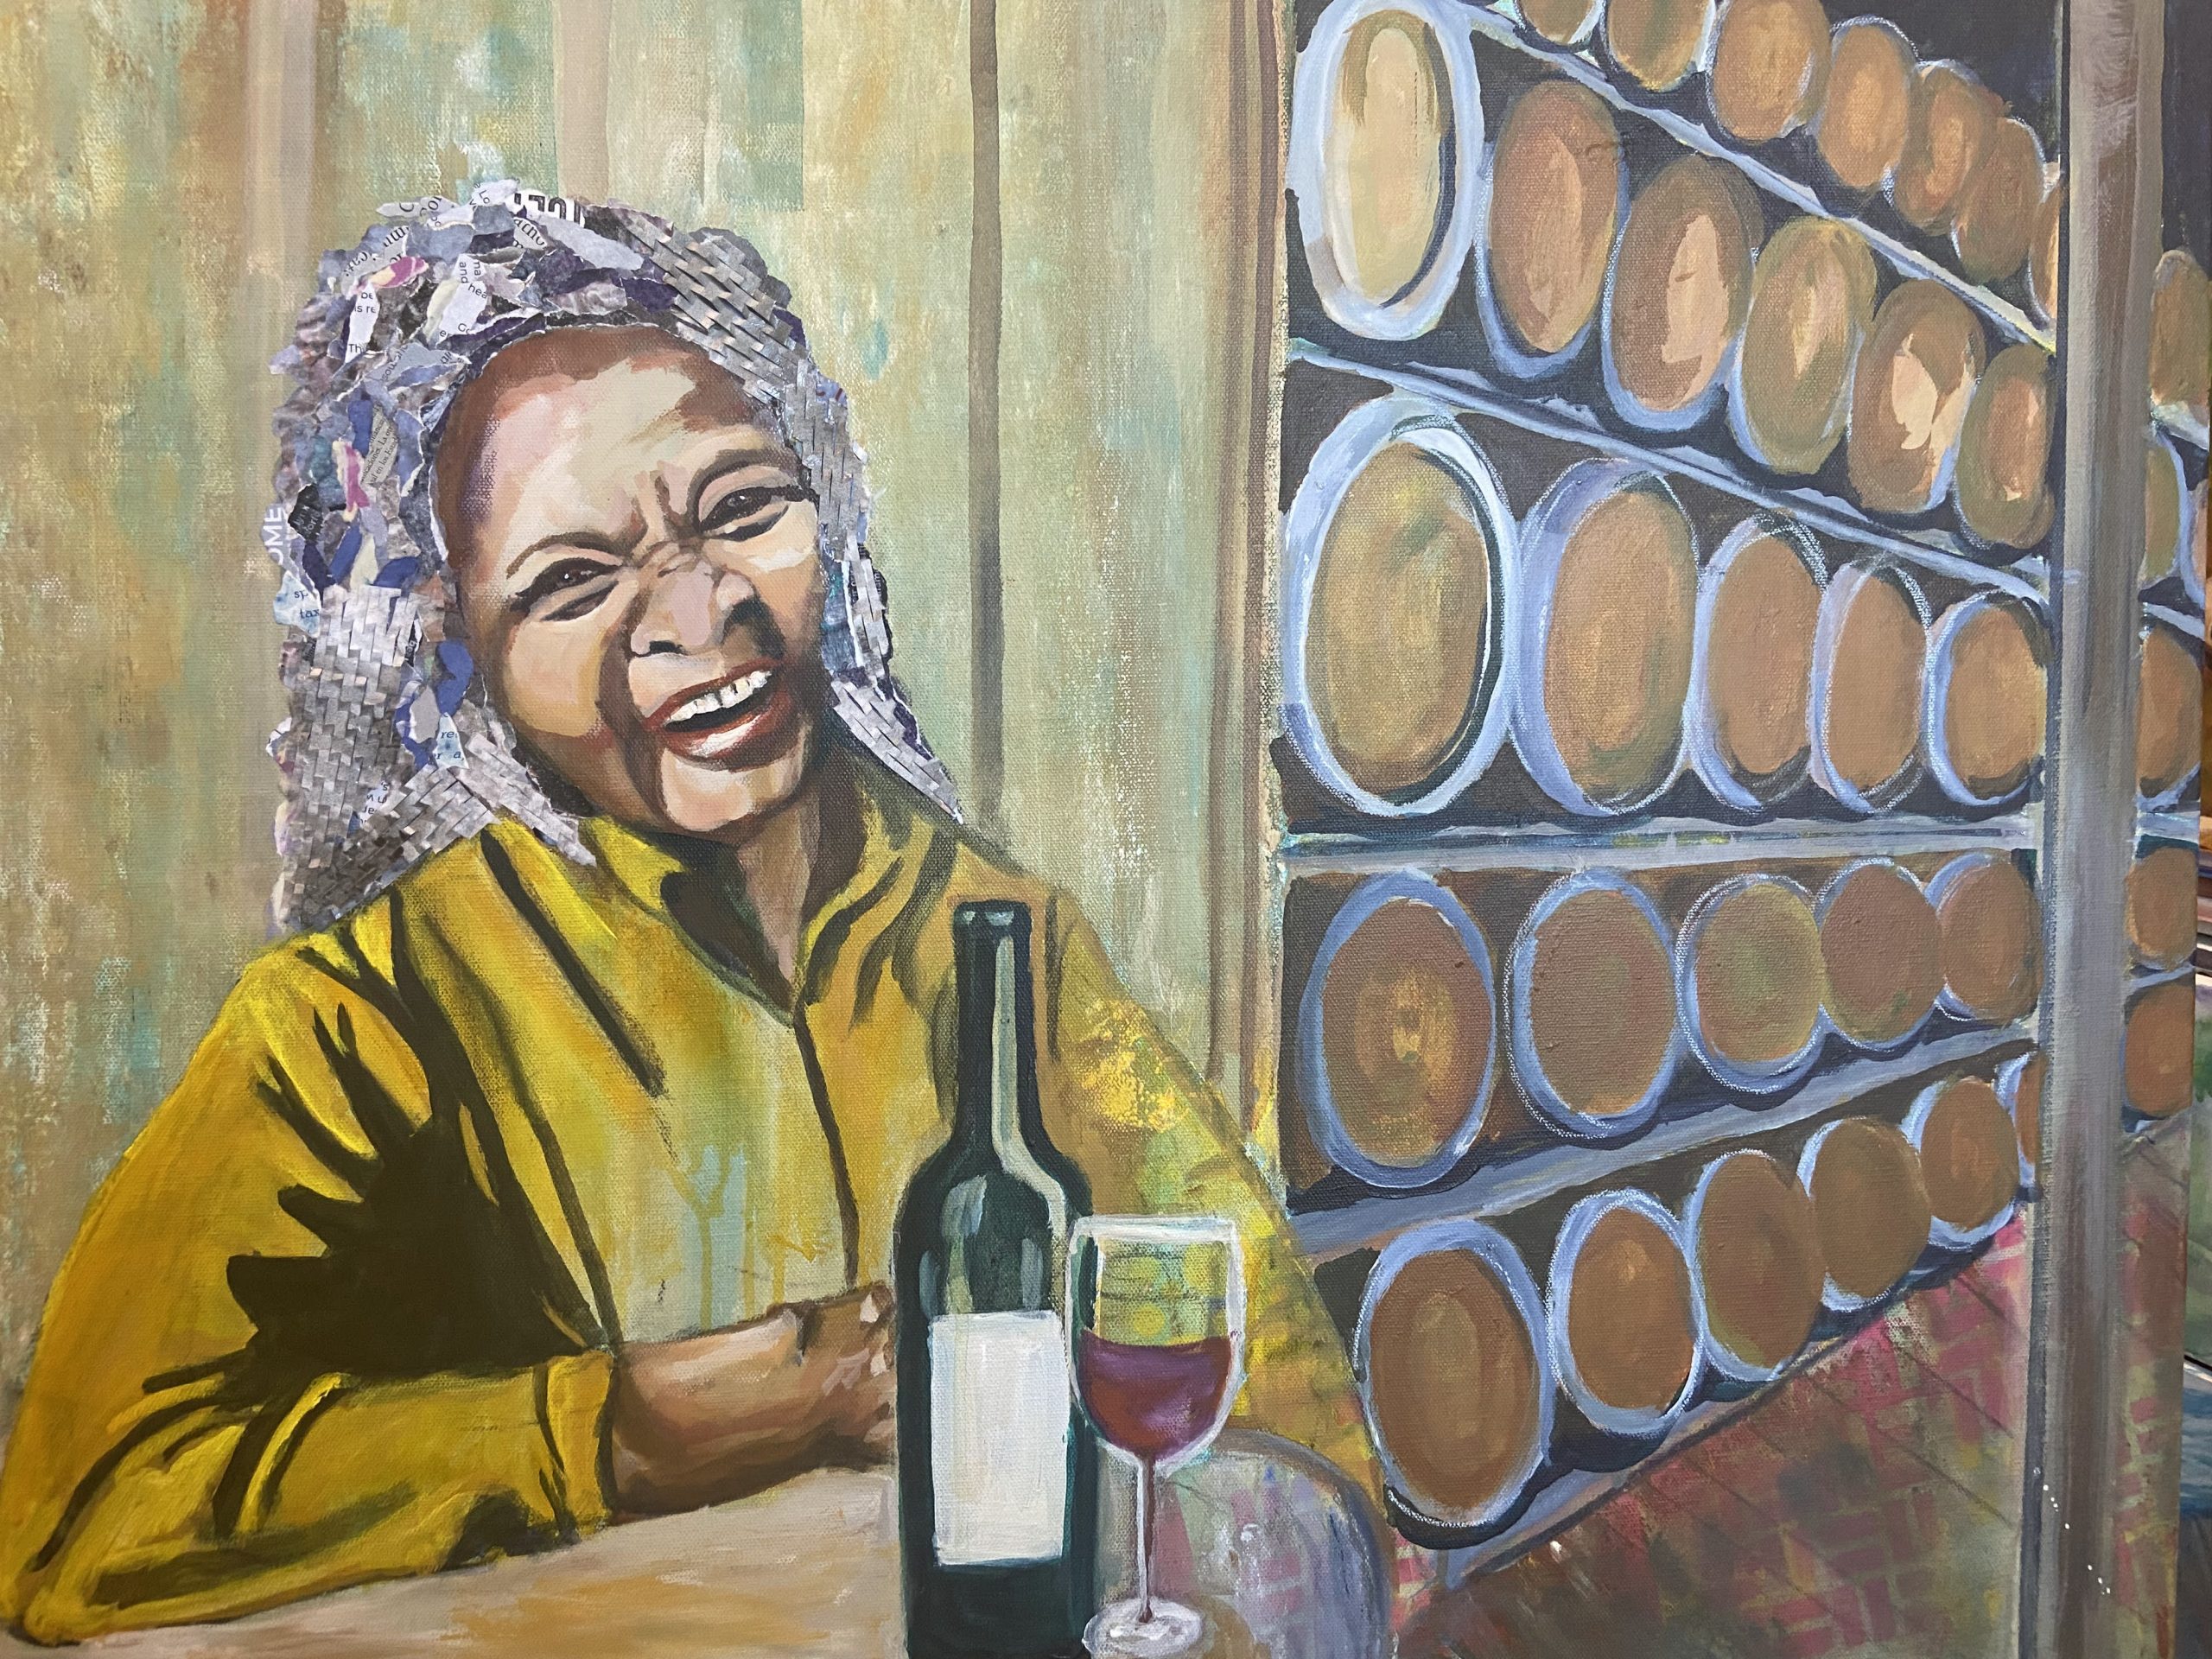 The beginning of the collage process on the woman's hair in the painting titled "Barrels of Fun."